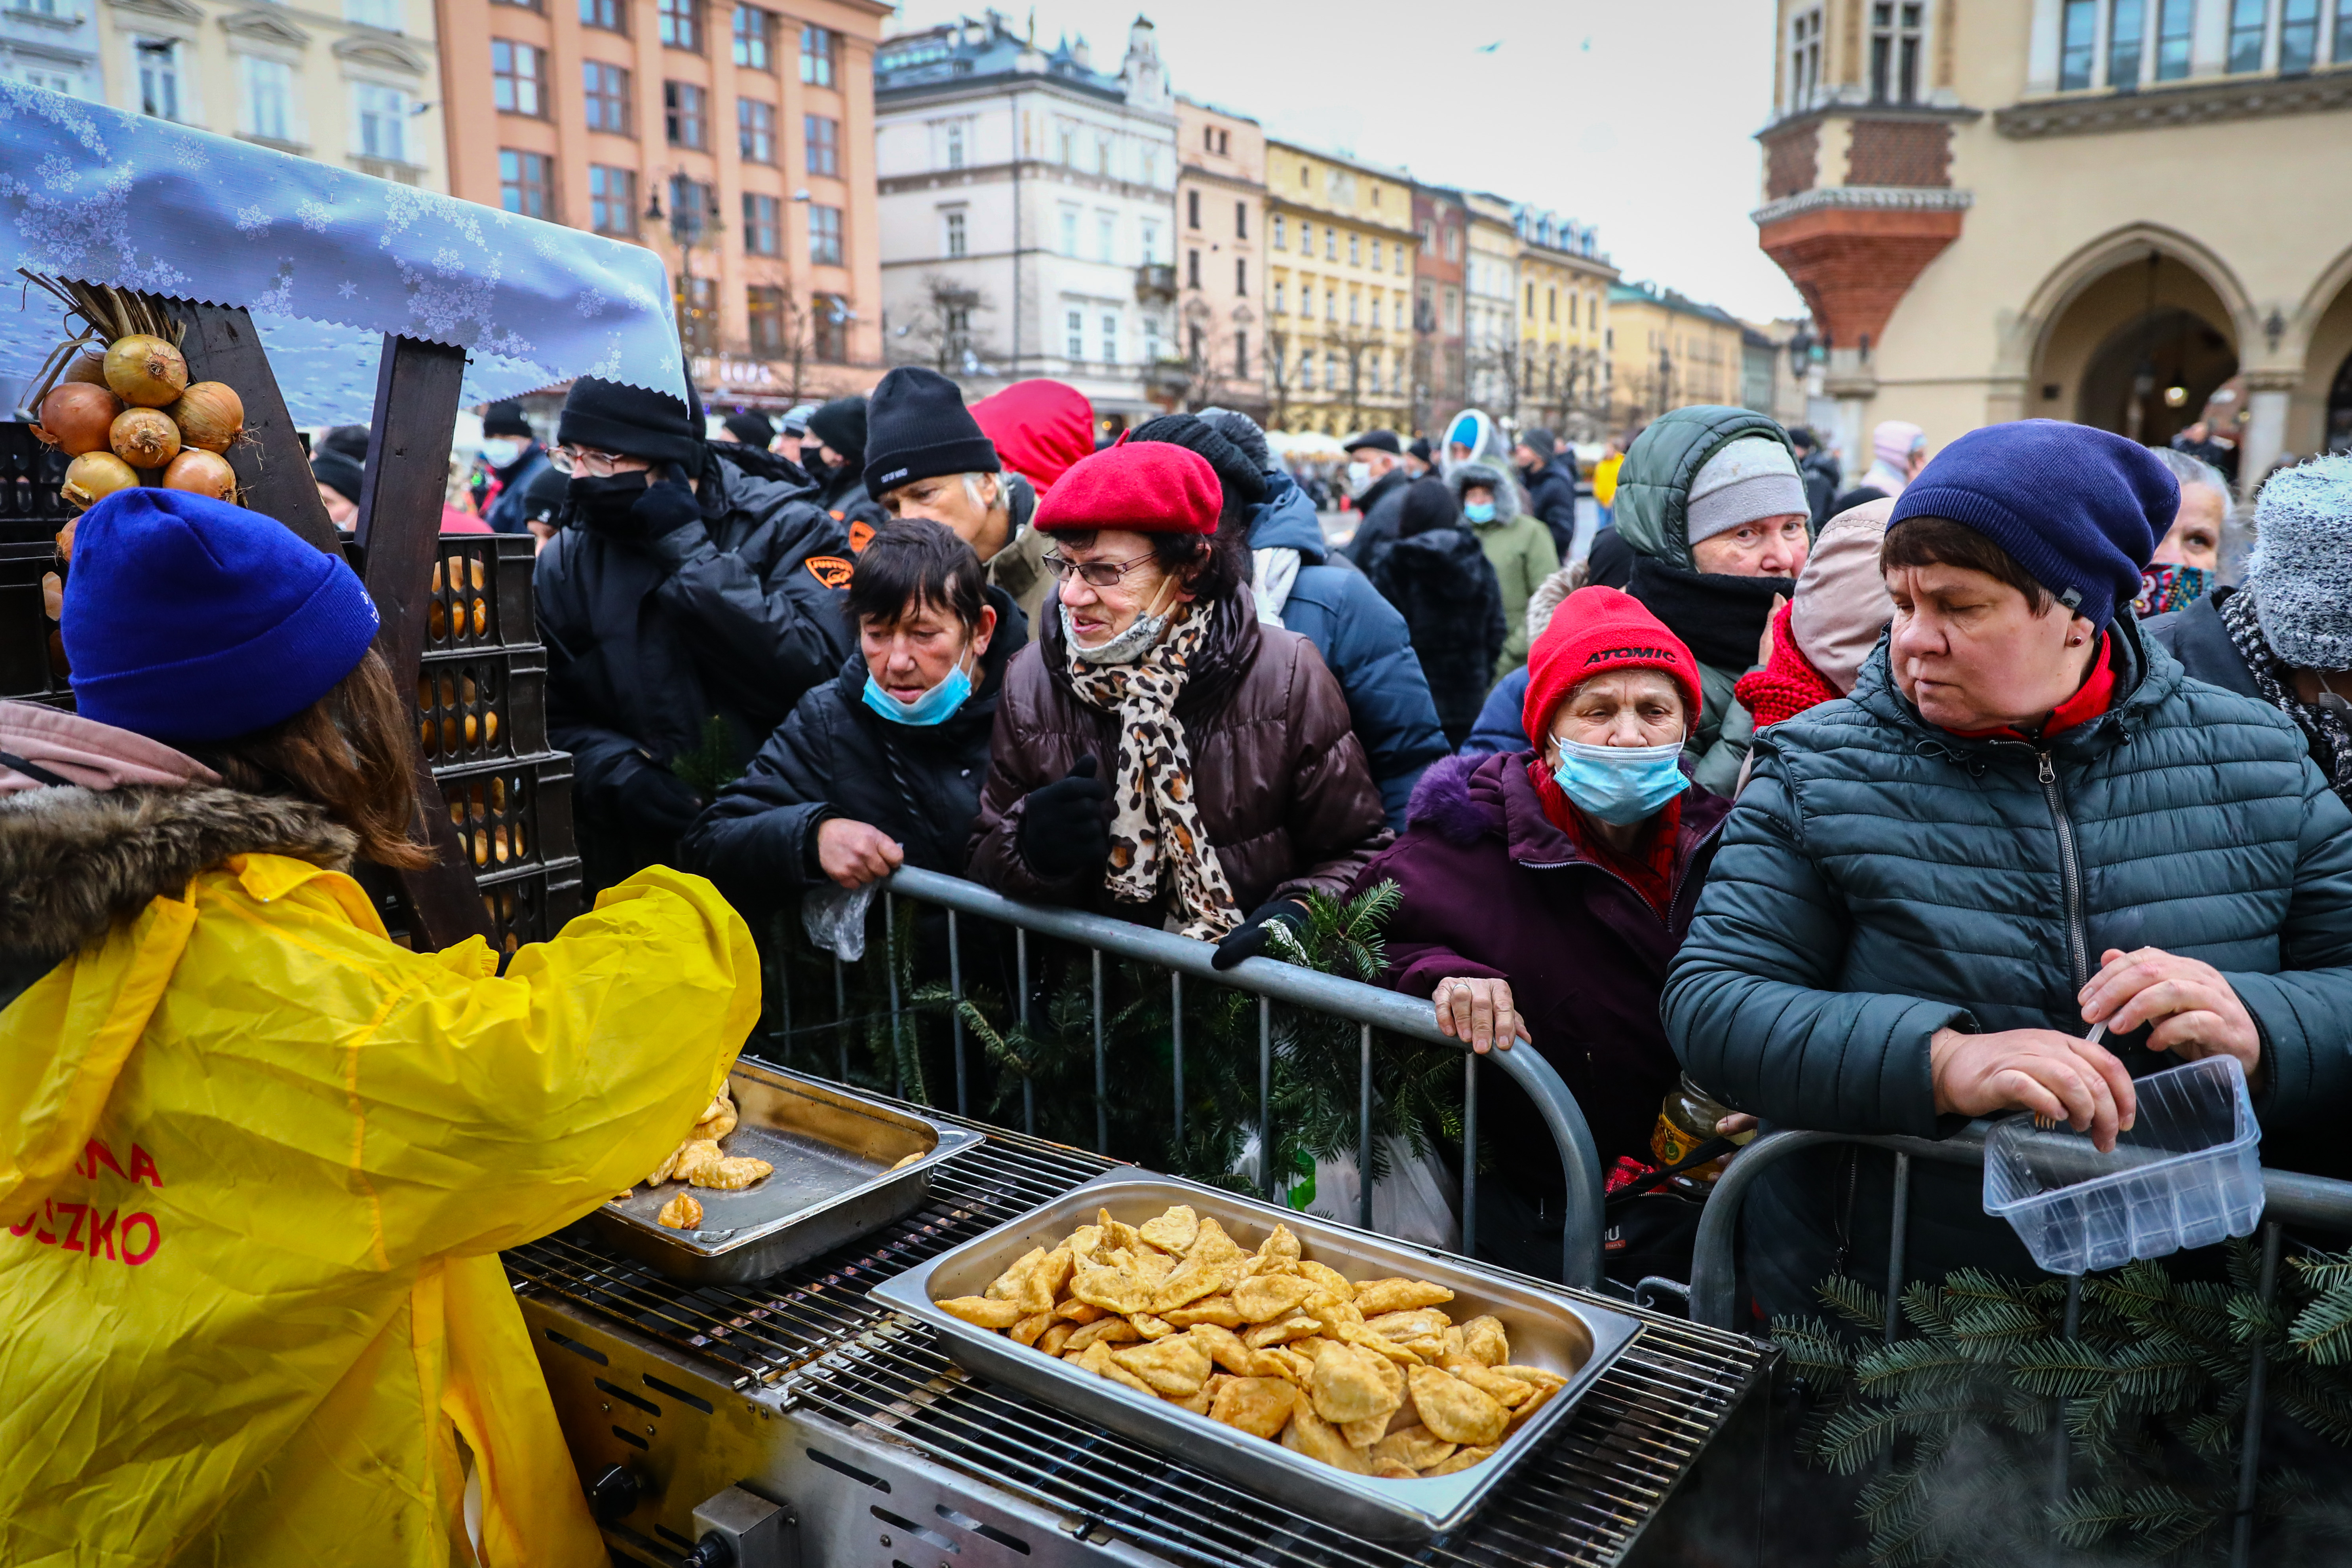 Food distribution during the Christmas Eve Supper for the homeless and poor during the coronavirus pandemic at the Main Square in Krakow, Poland on December 19. 